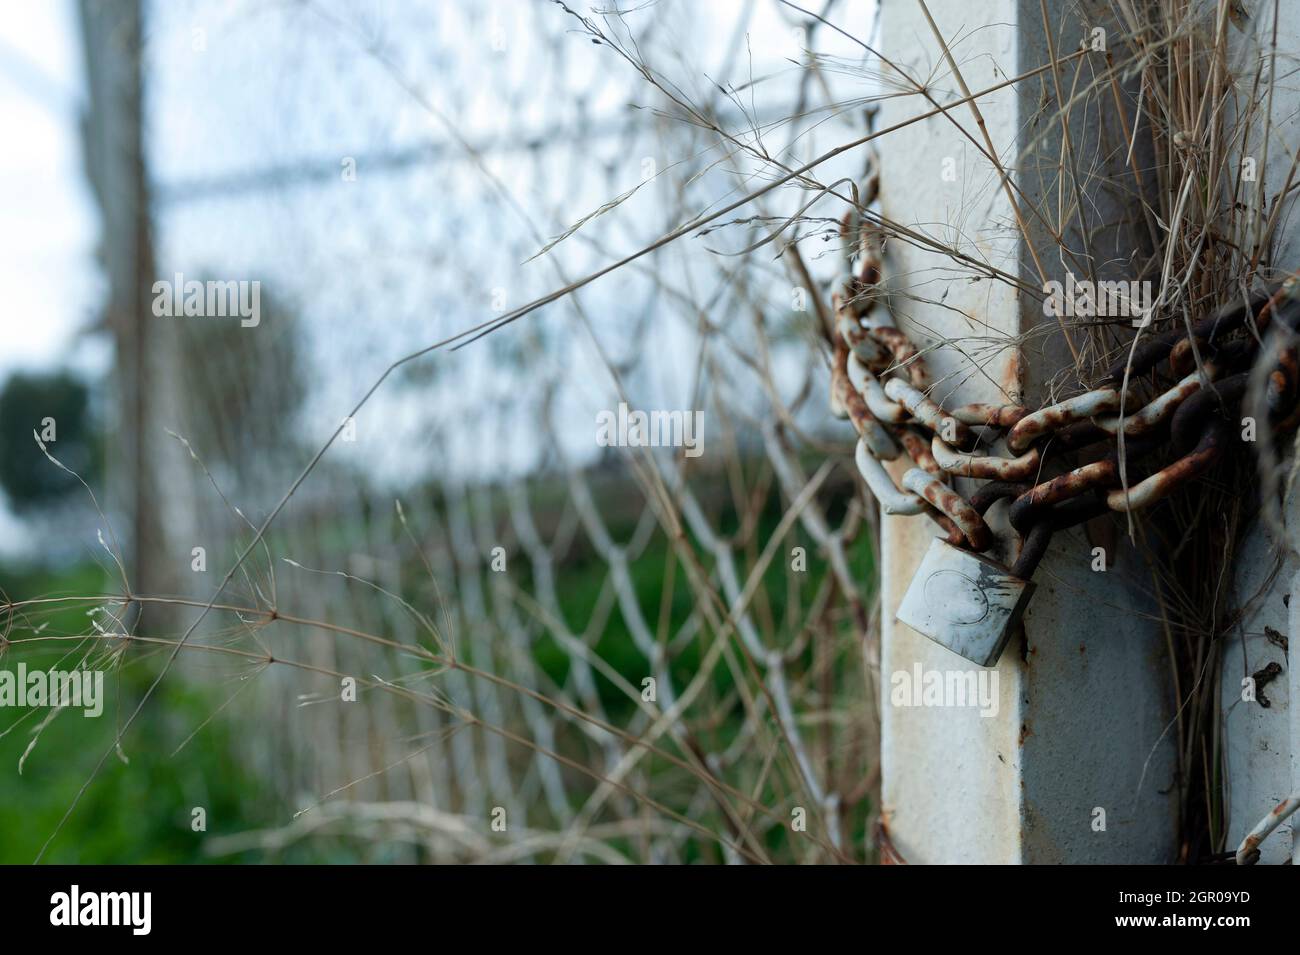 Security, prisoner, prison, fence, wire mesh, restricted area. Stock Photo